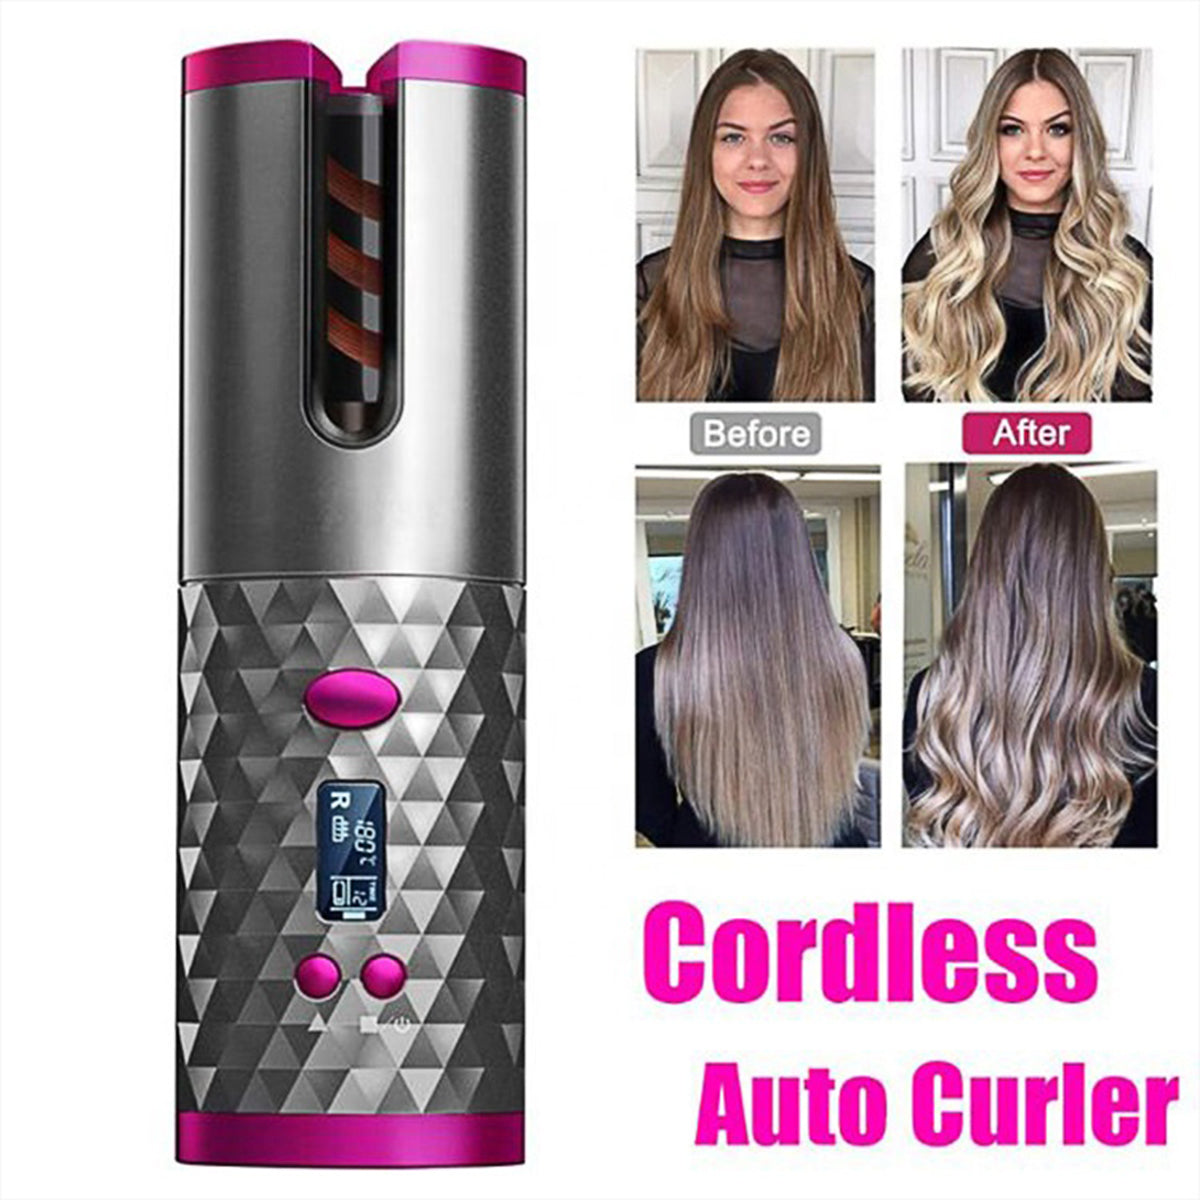 Cordless Automatic Hair Curling Iron Wand - Rechargable